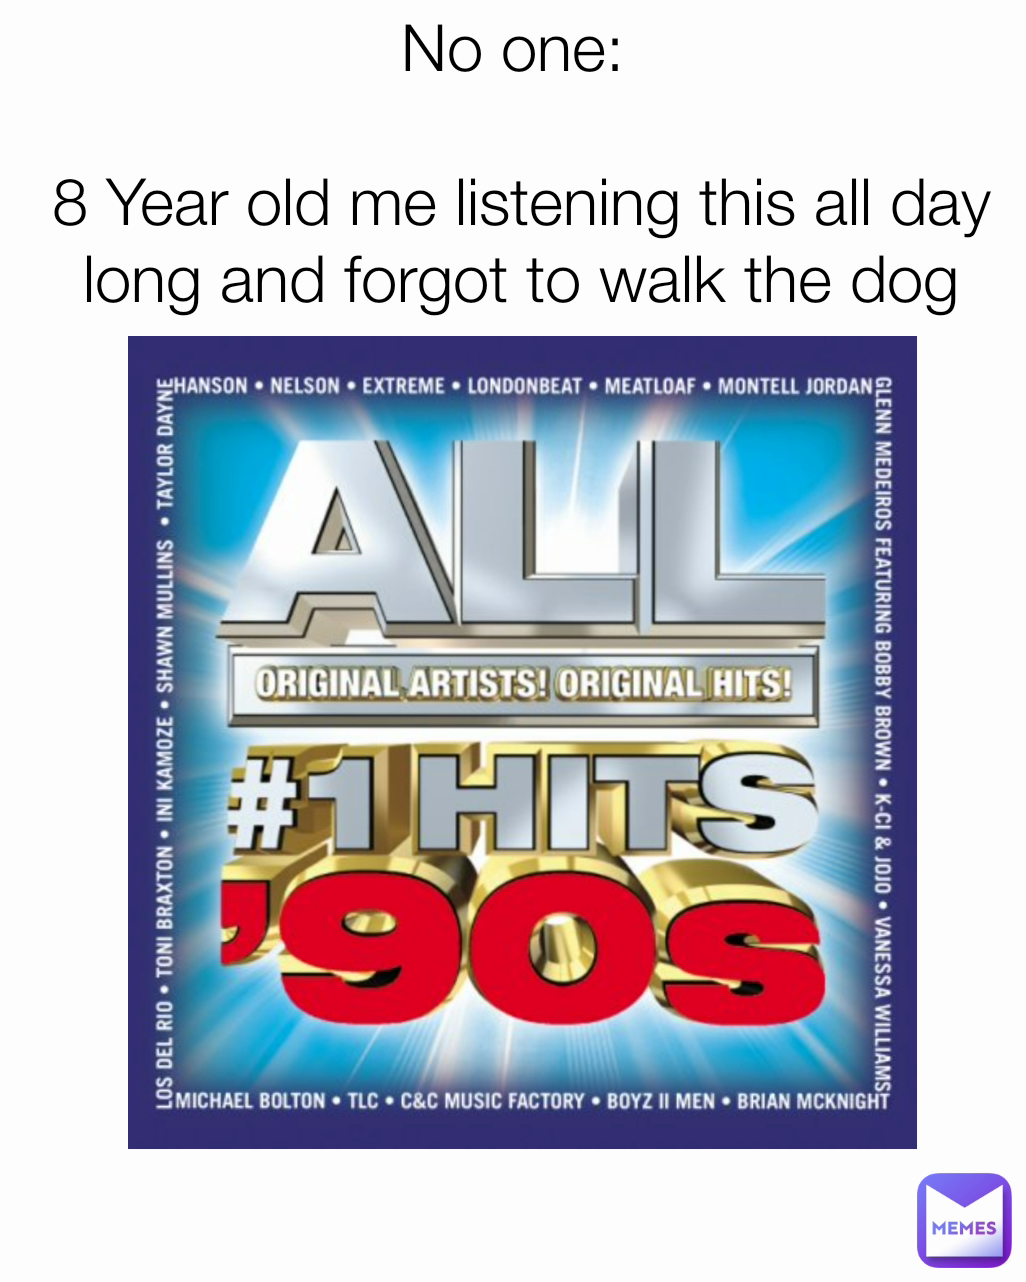 No one: 

8 Year old me listening this all day long and forgot to walk the dog